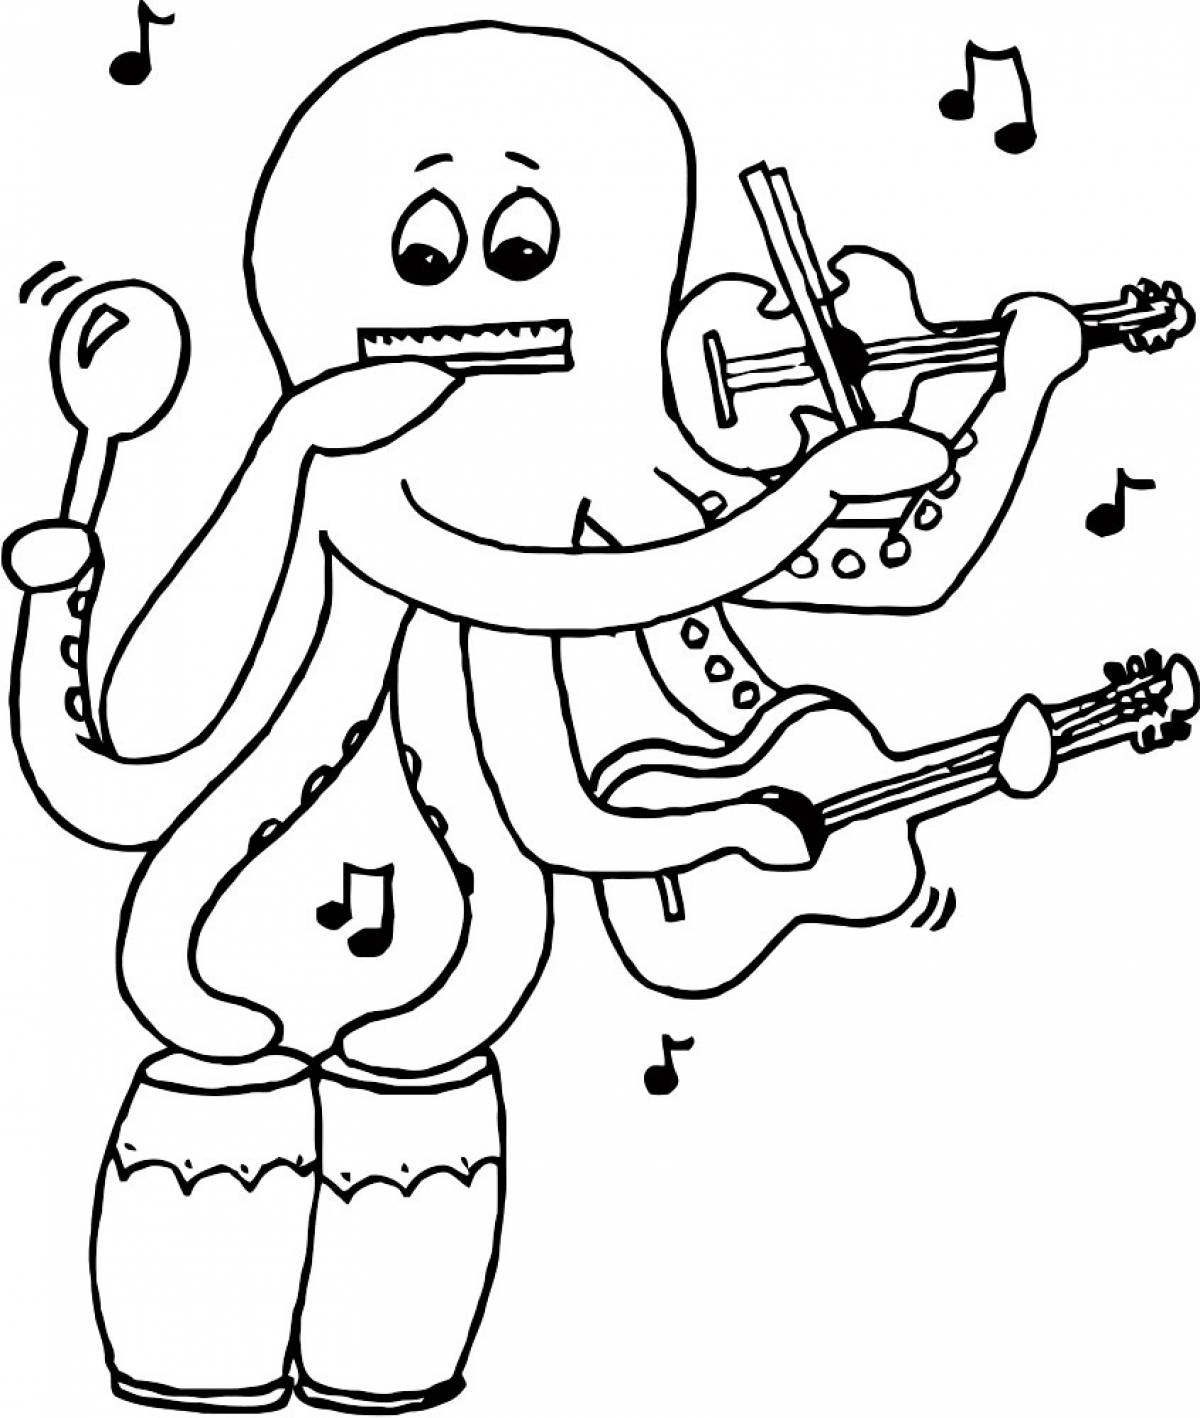 Octopus and notes